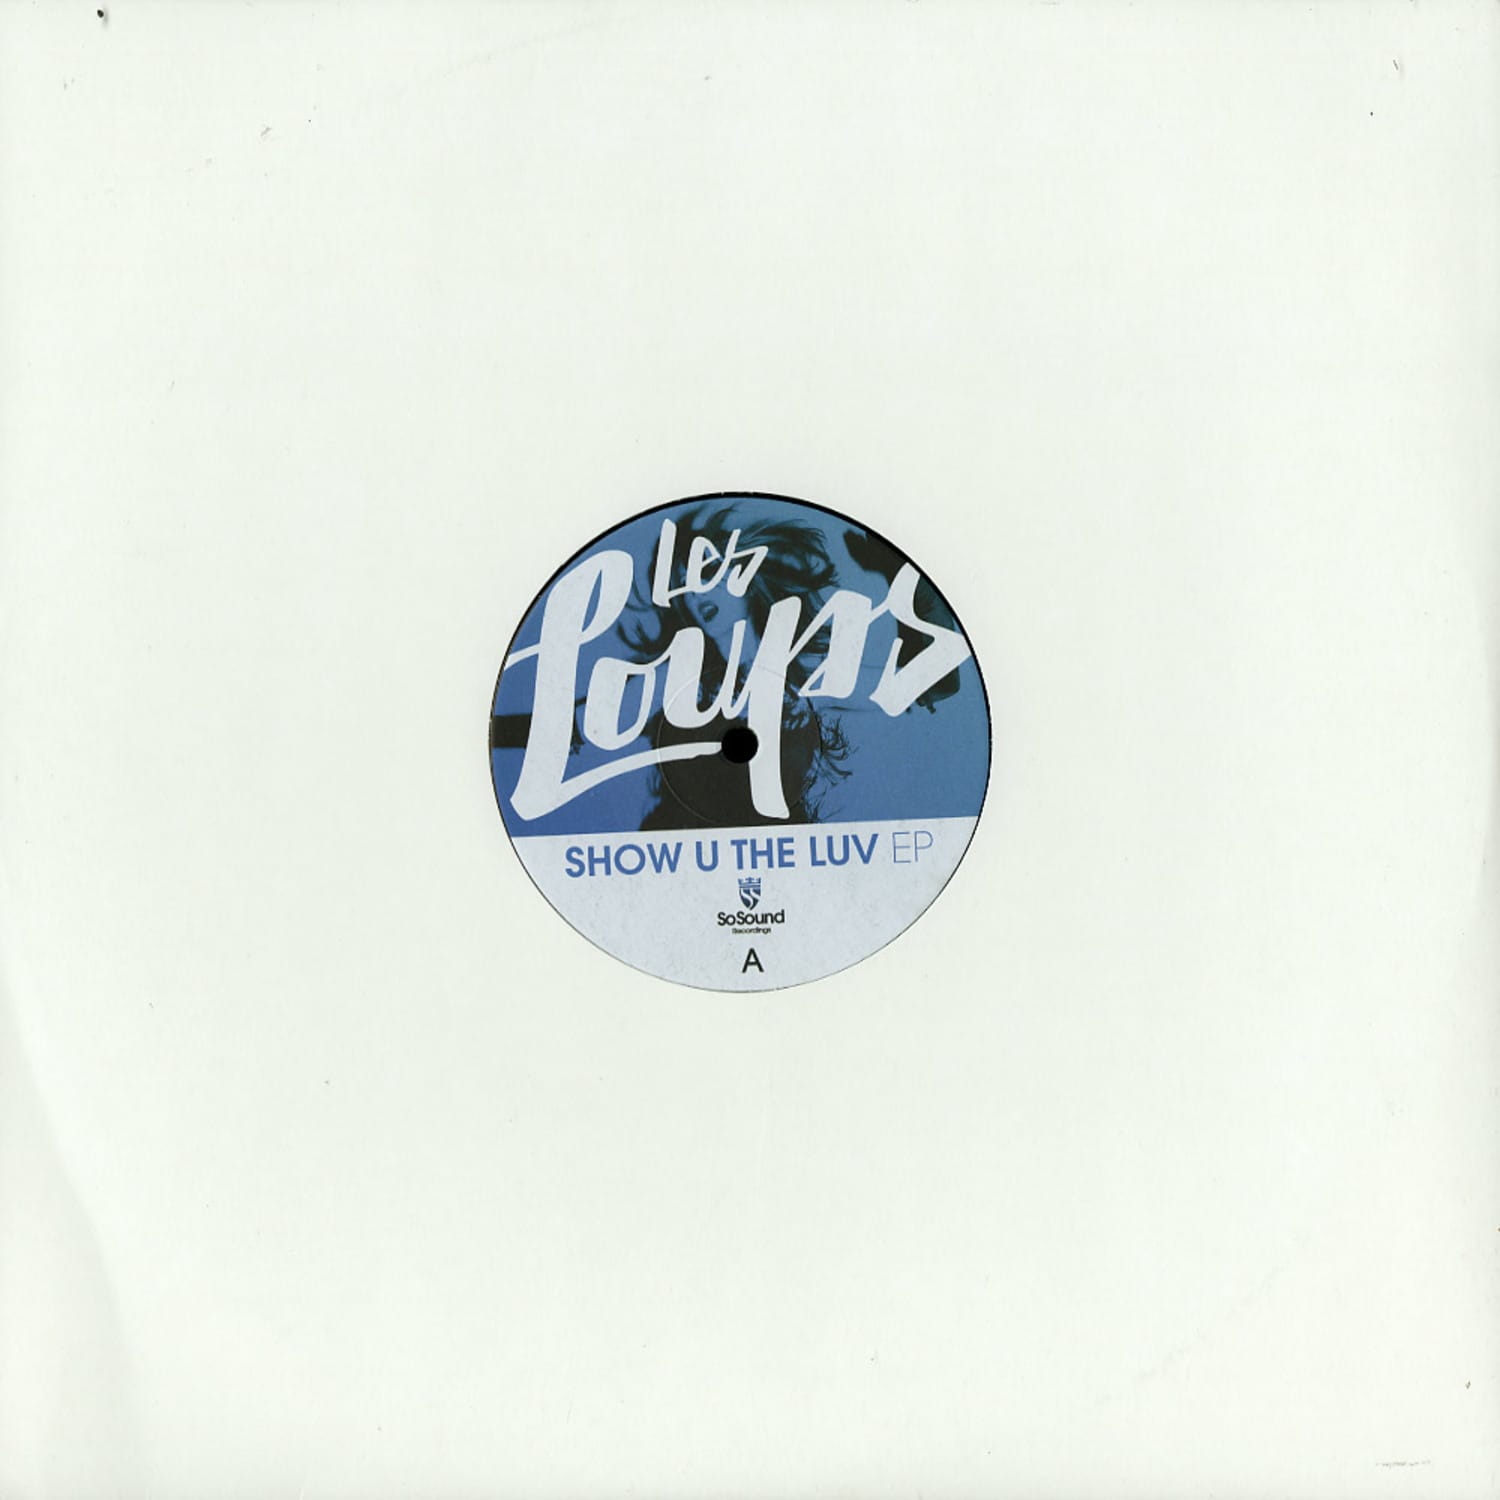 Les Loups - SHOW U THE LUV EP